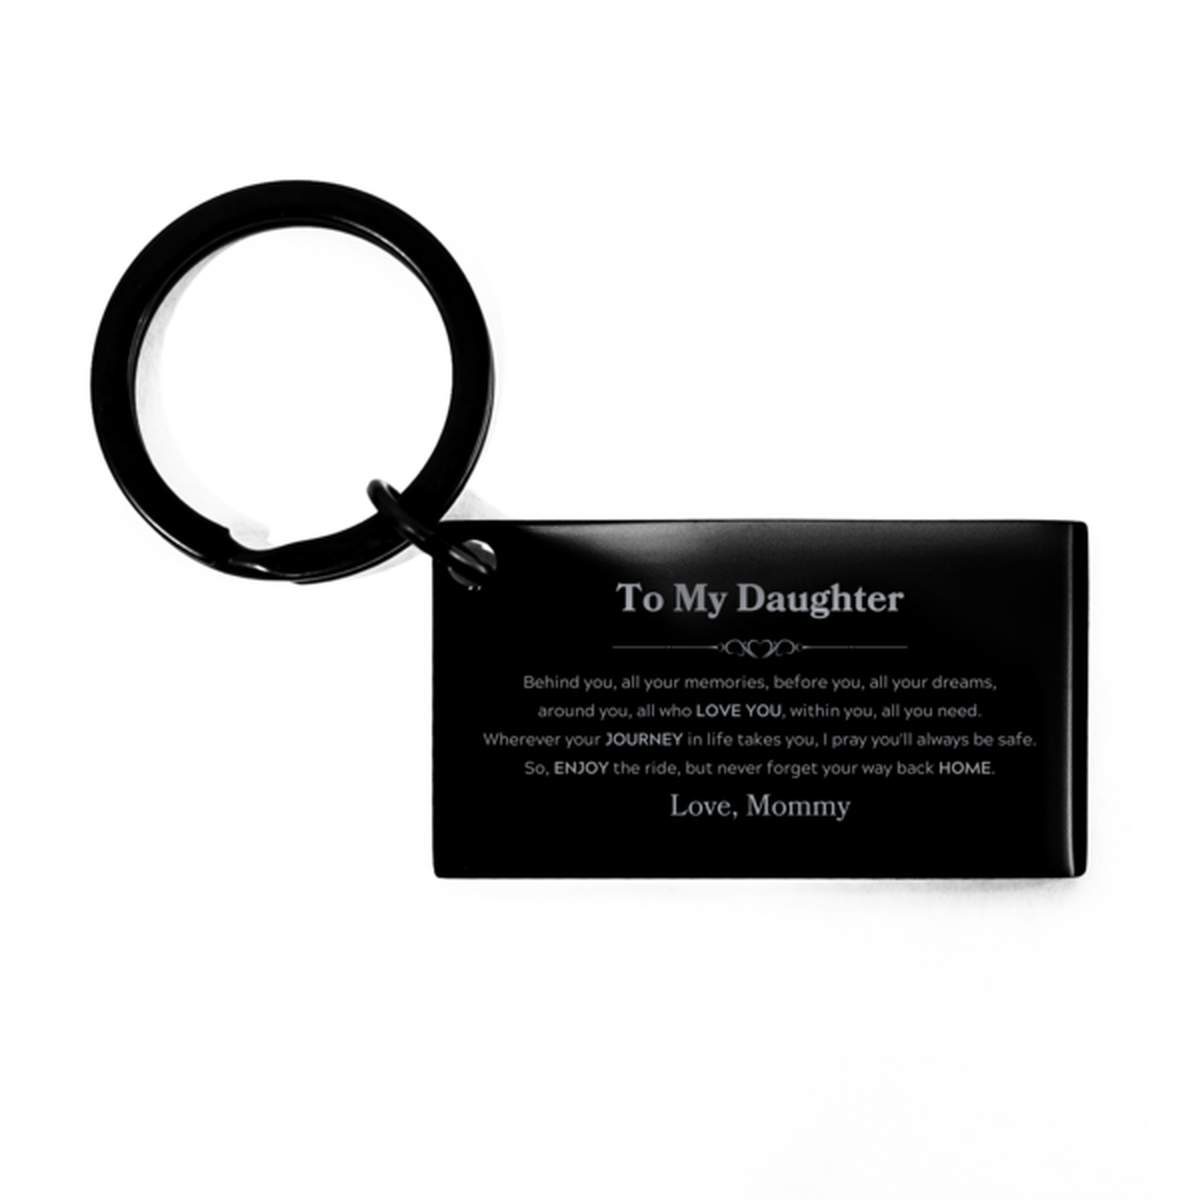 To My Daughter Graduation Gifts from Mommy, Daughter Keychain Christmas Birthday Gifts for Daughter Behind you, all your memories, before you, all your dreams. Love, Mommy